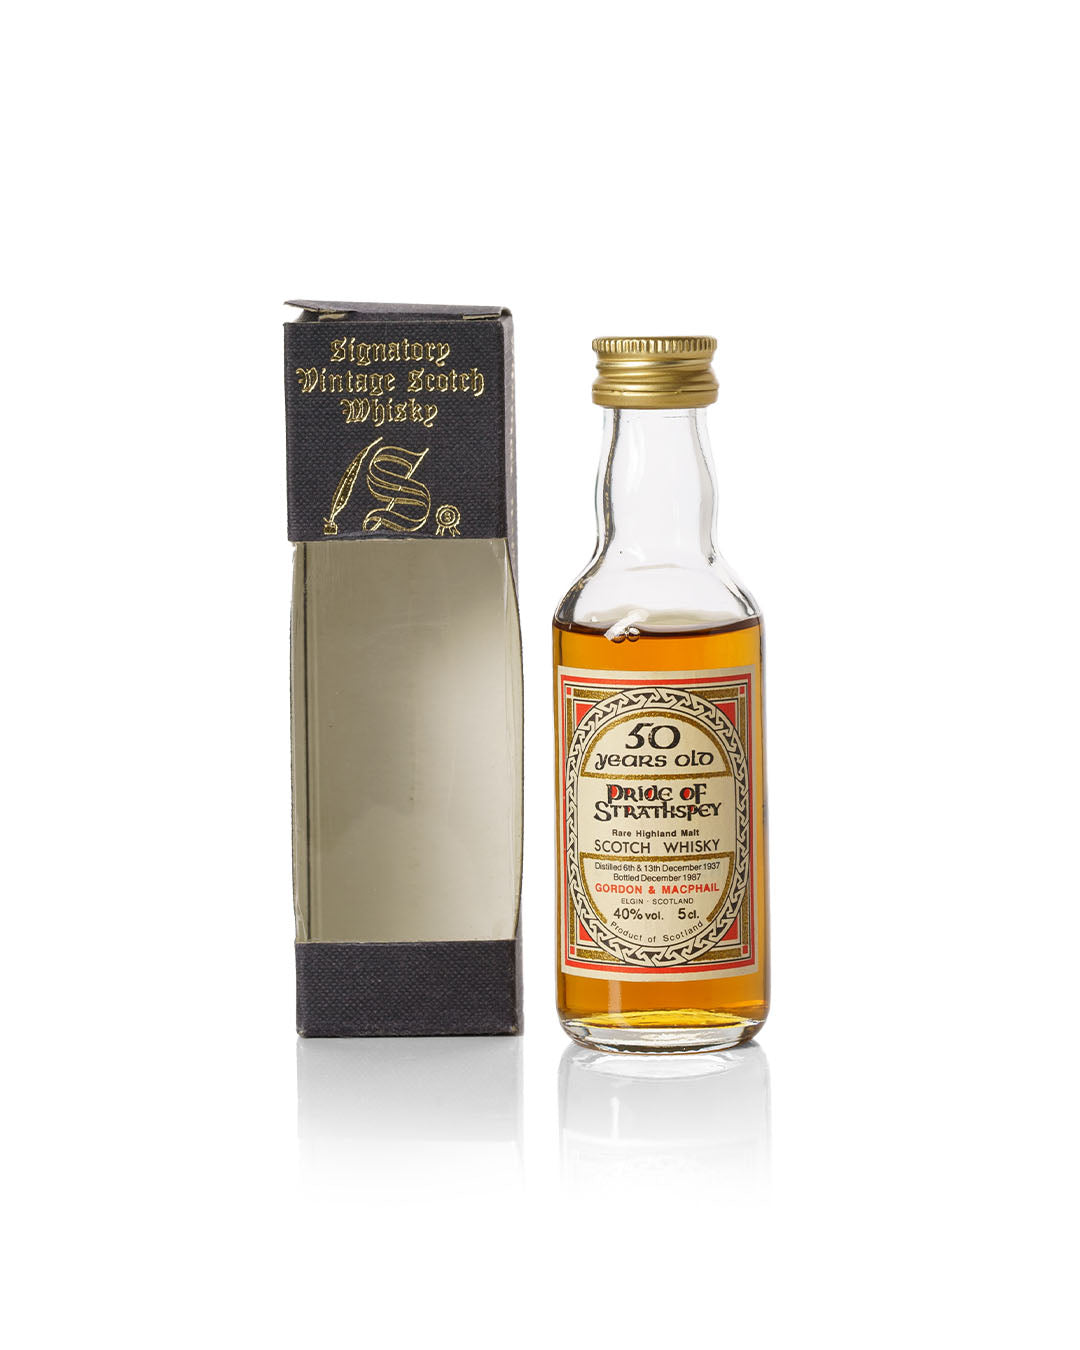 Pride of Strathspey 1937 50 Year Old Gordon & Macphail Bottled 1987 5cl Miniature With Original Box